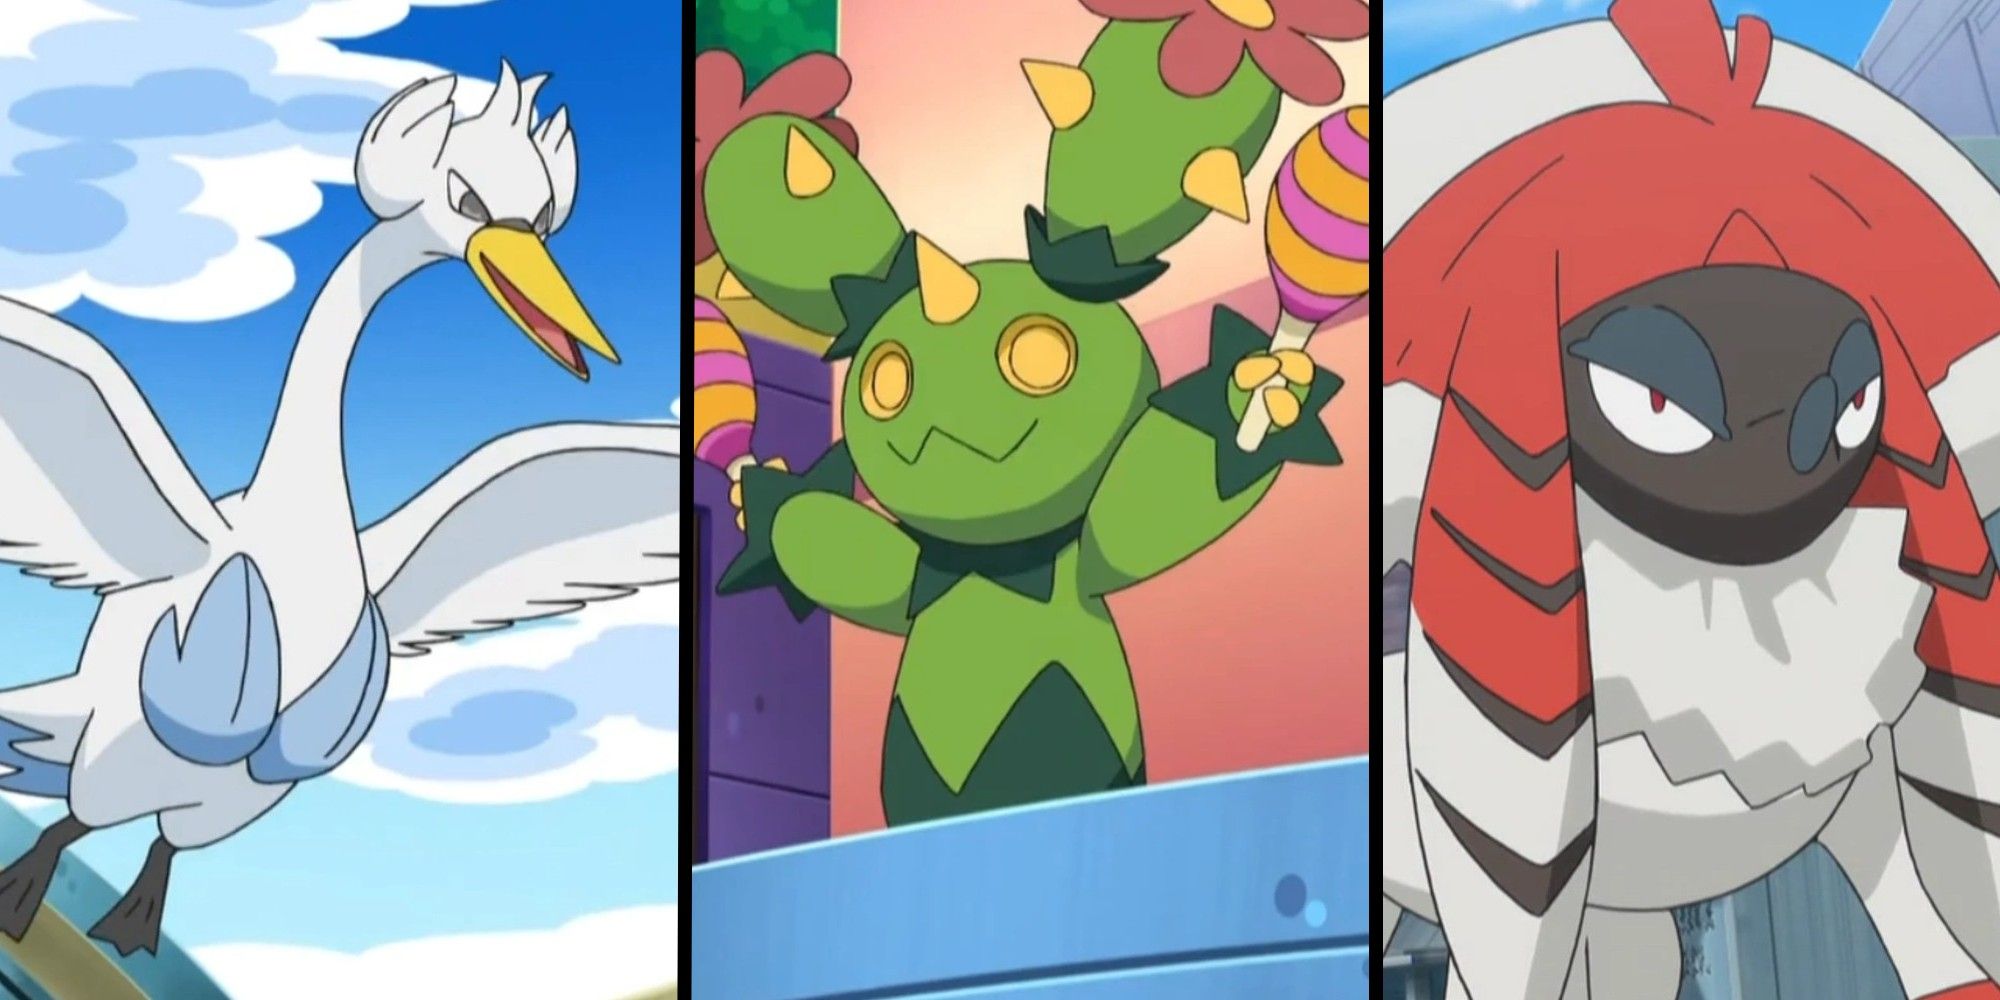 10 Pokemon that desperately need a buff Feature Image: Swanna on the left, Furfrou on the right, Maractus in the middle